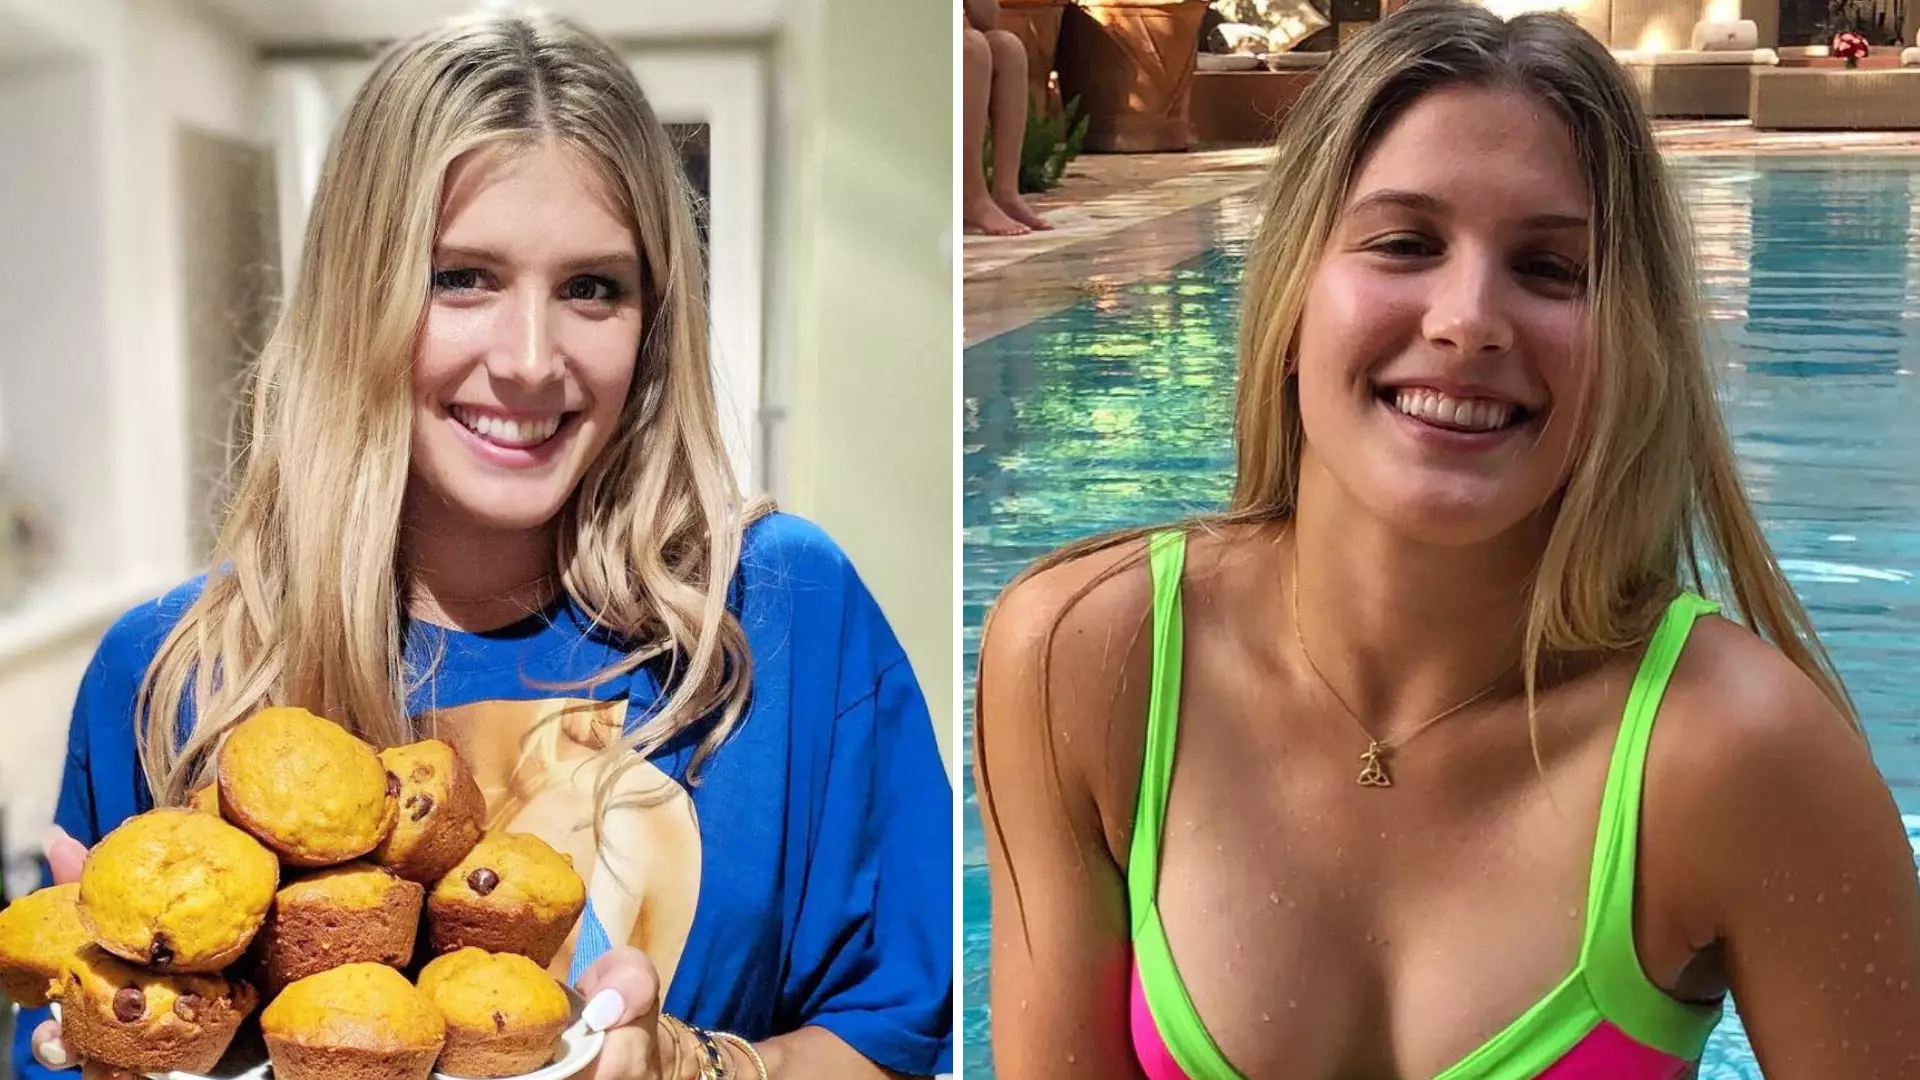 The Three Things You Need To Land A Date With Tennis Star Genie Bouchard